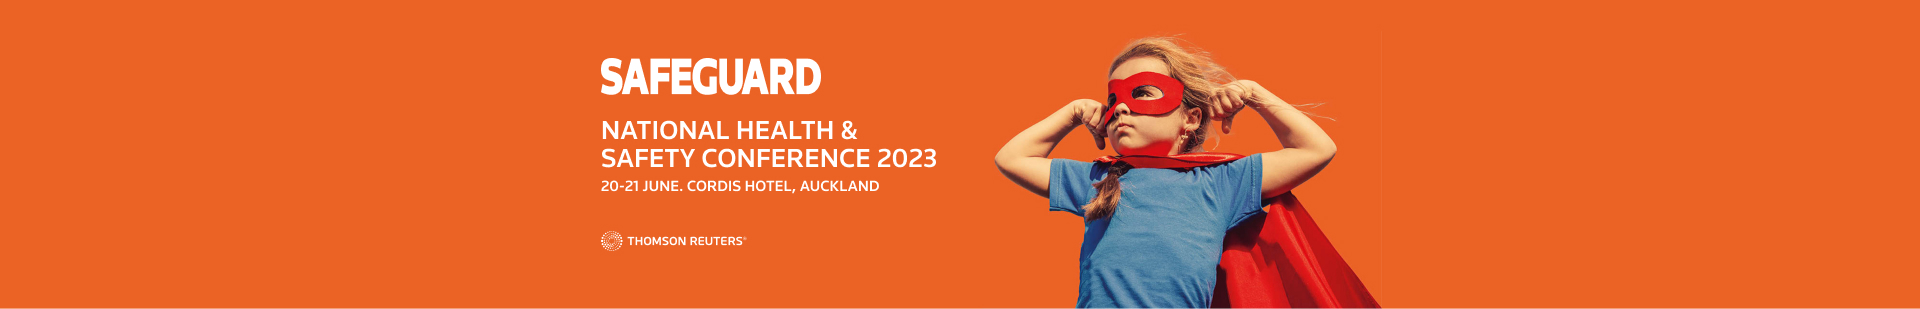 National Health & Safety Conference 2023